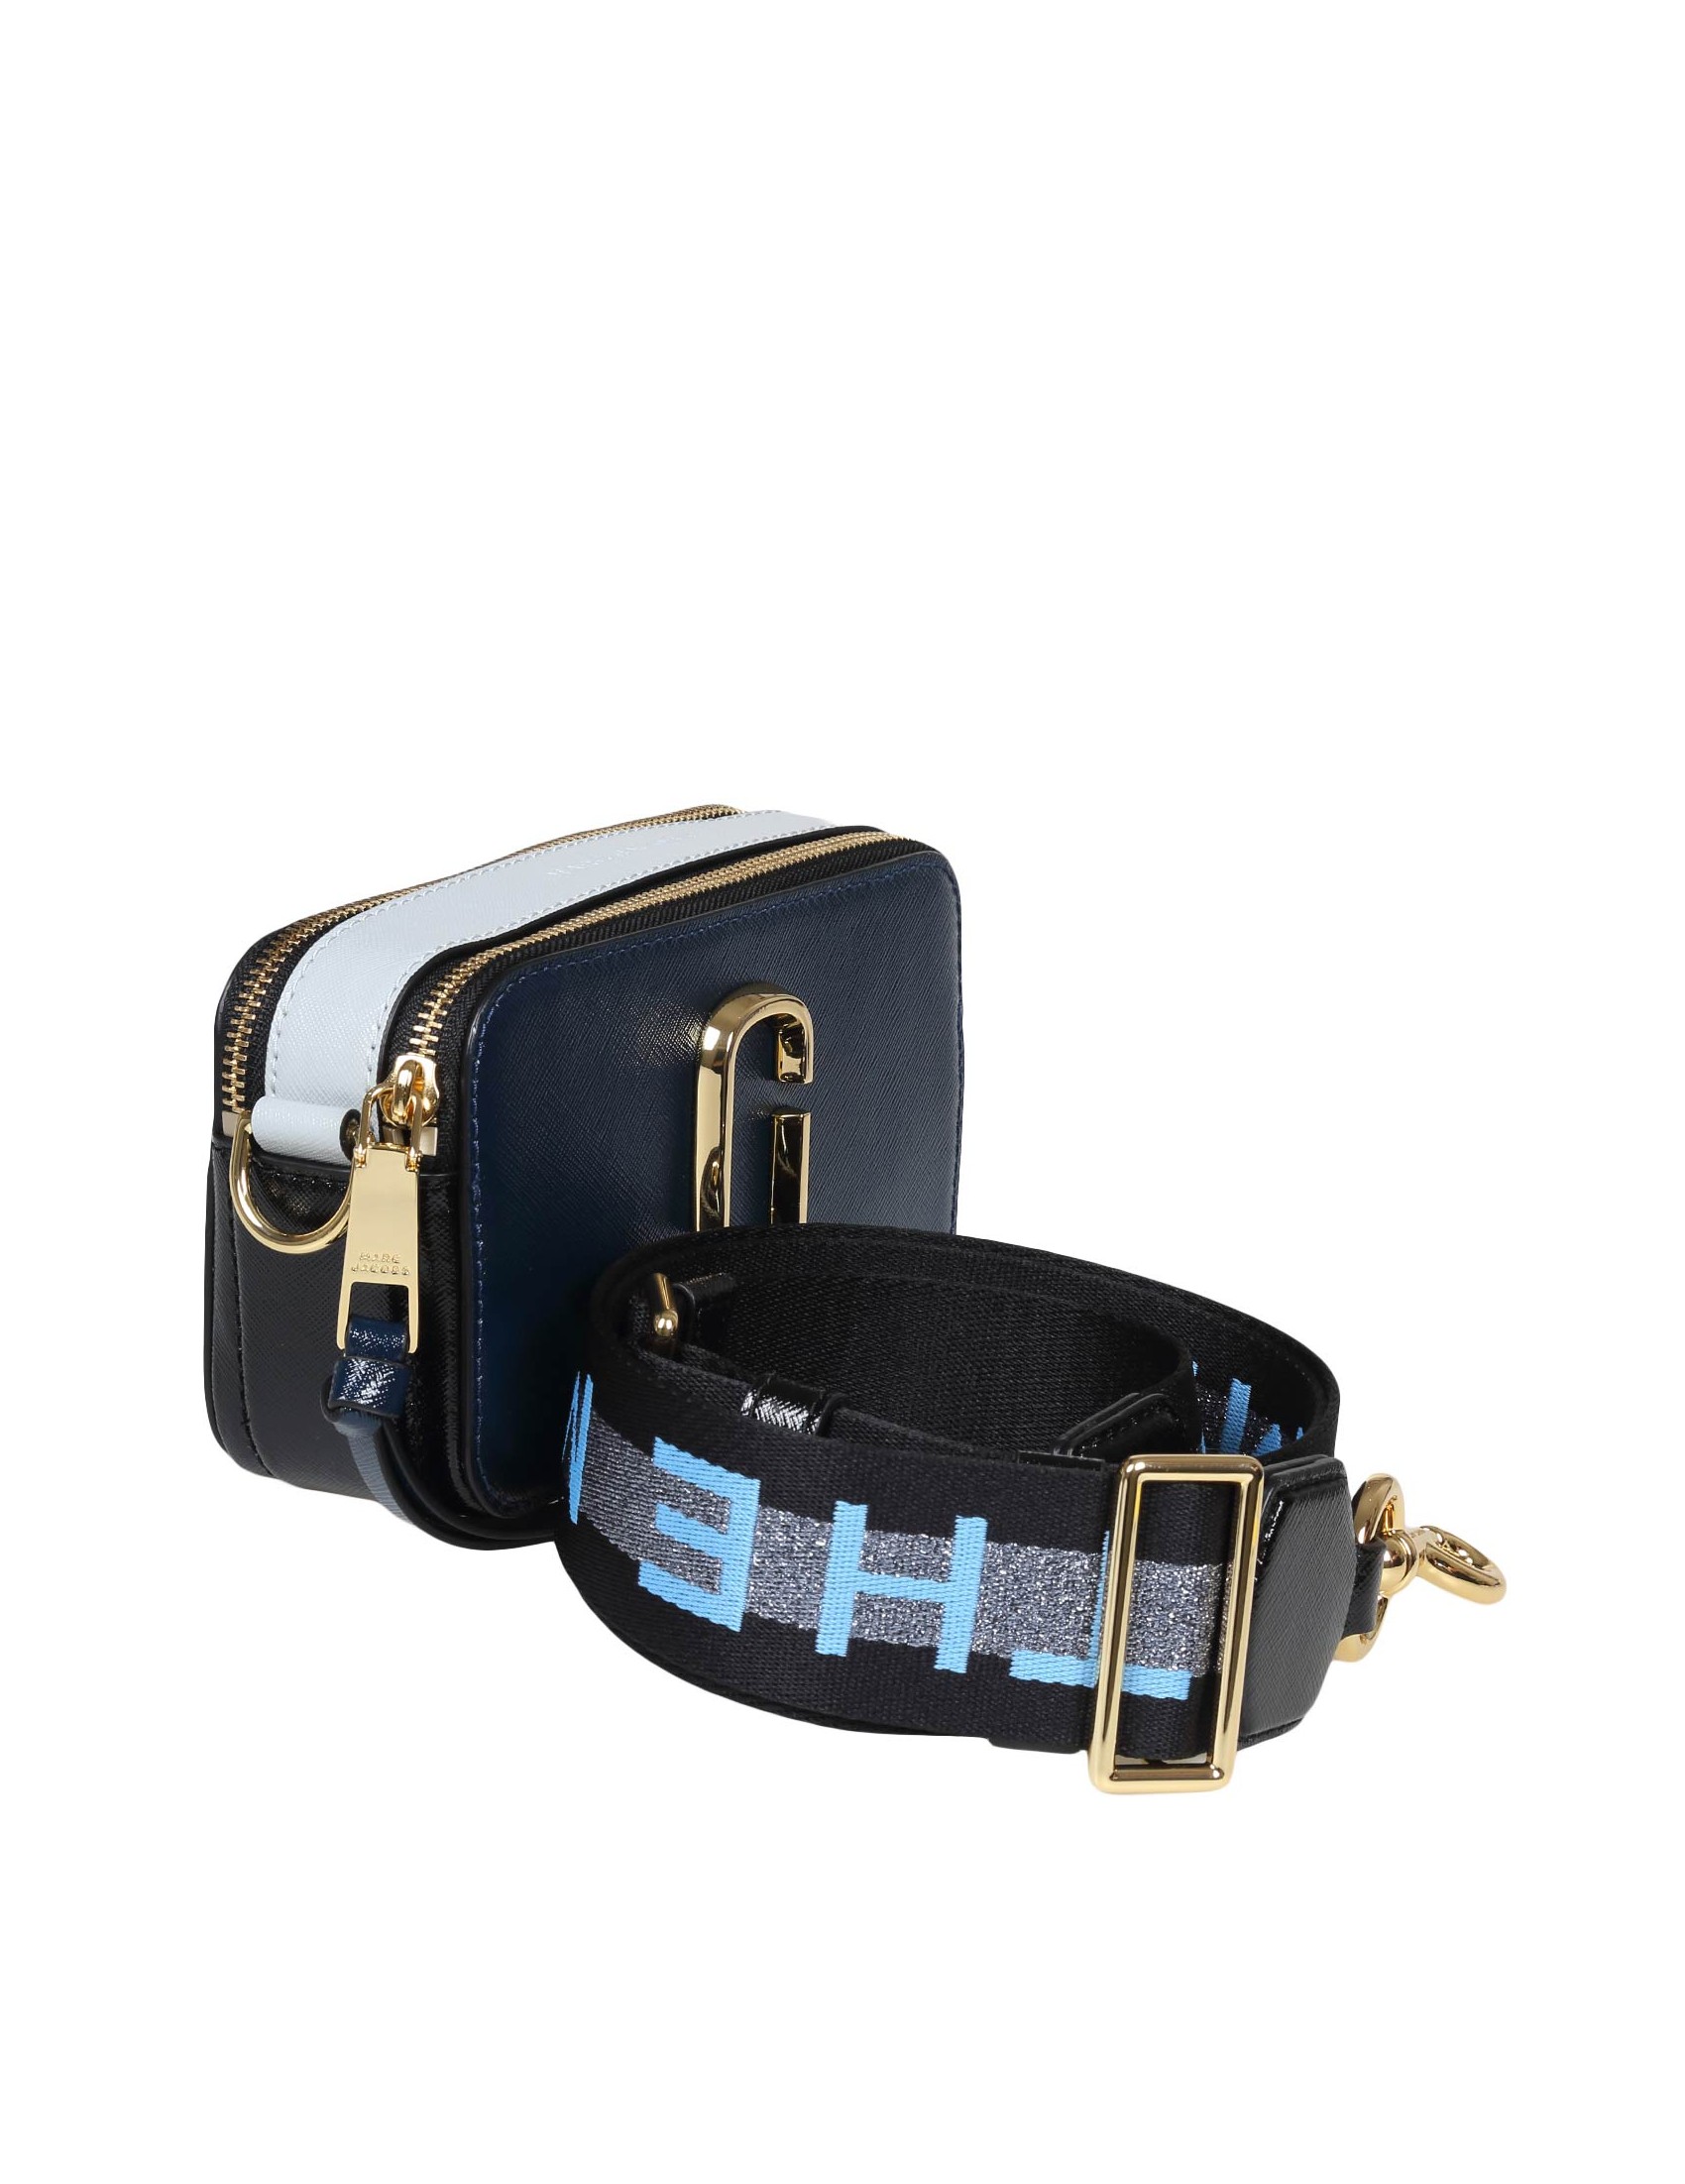 MARC JACOBS SNAPSHOT BAG IN BLUE LEATHER